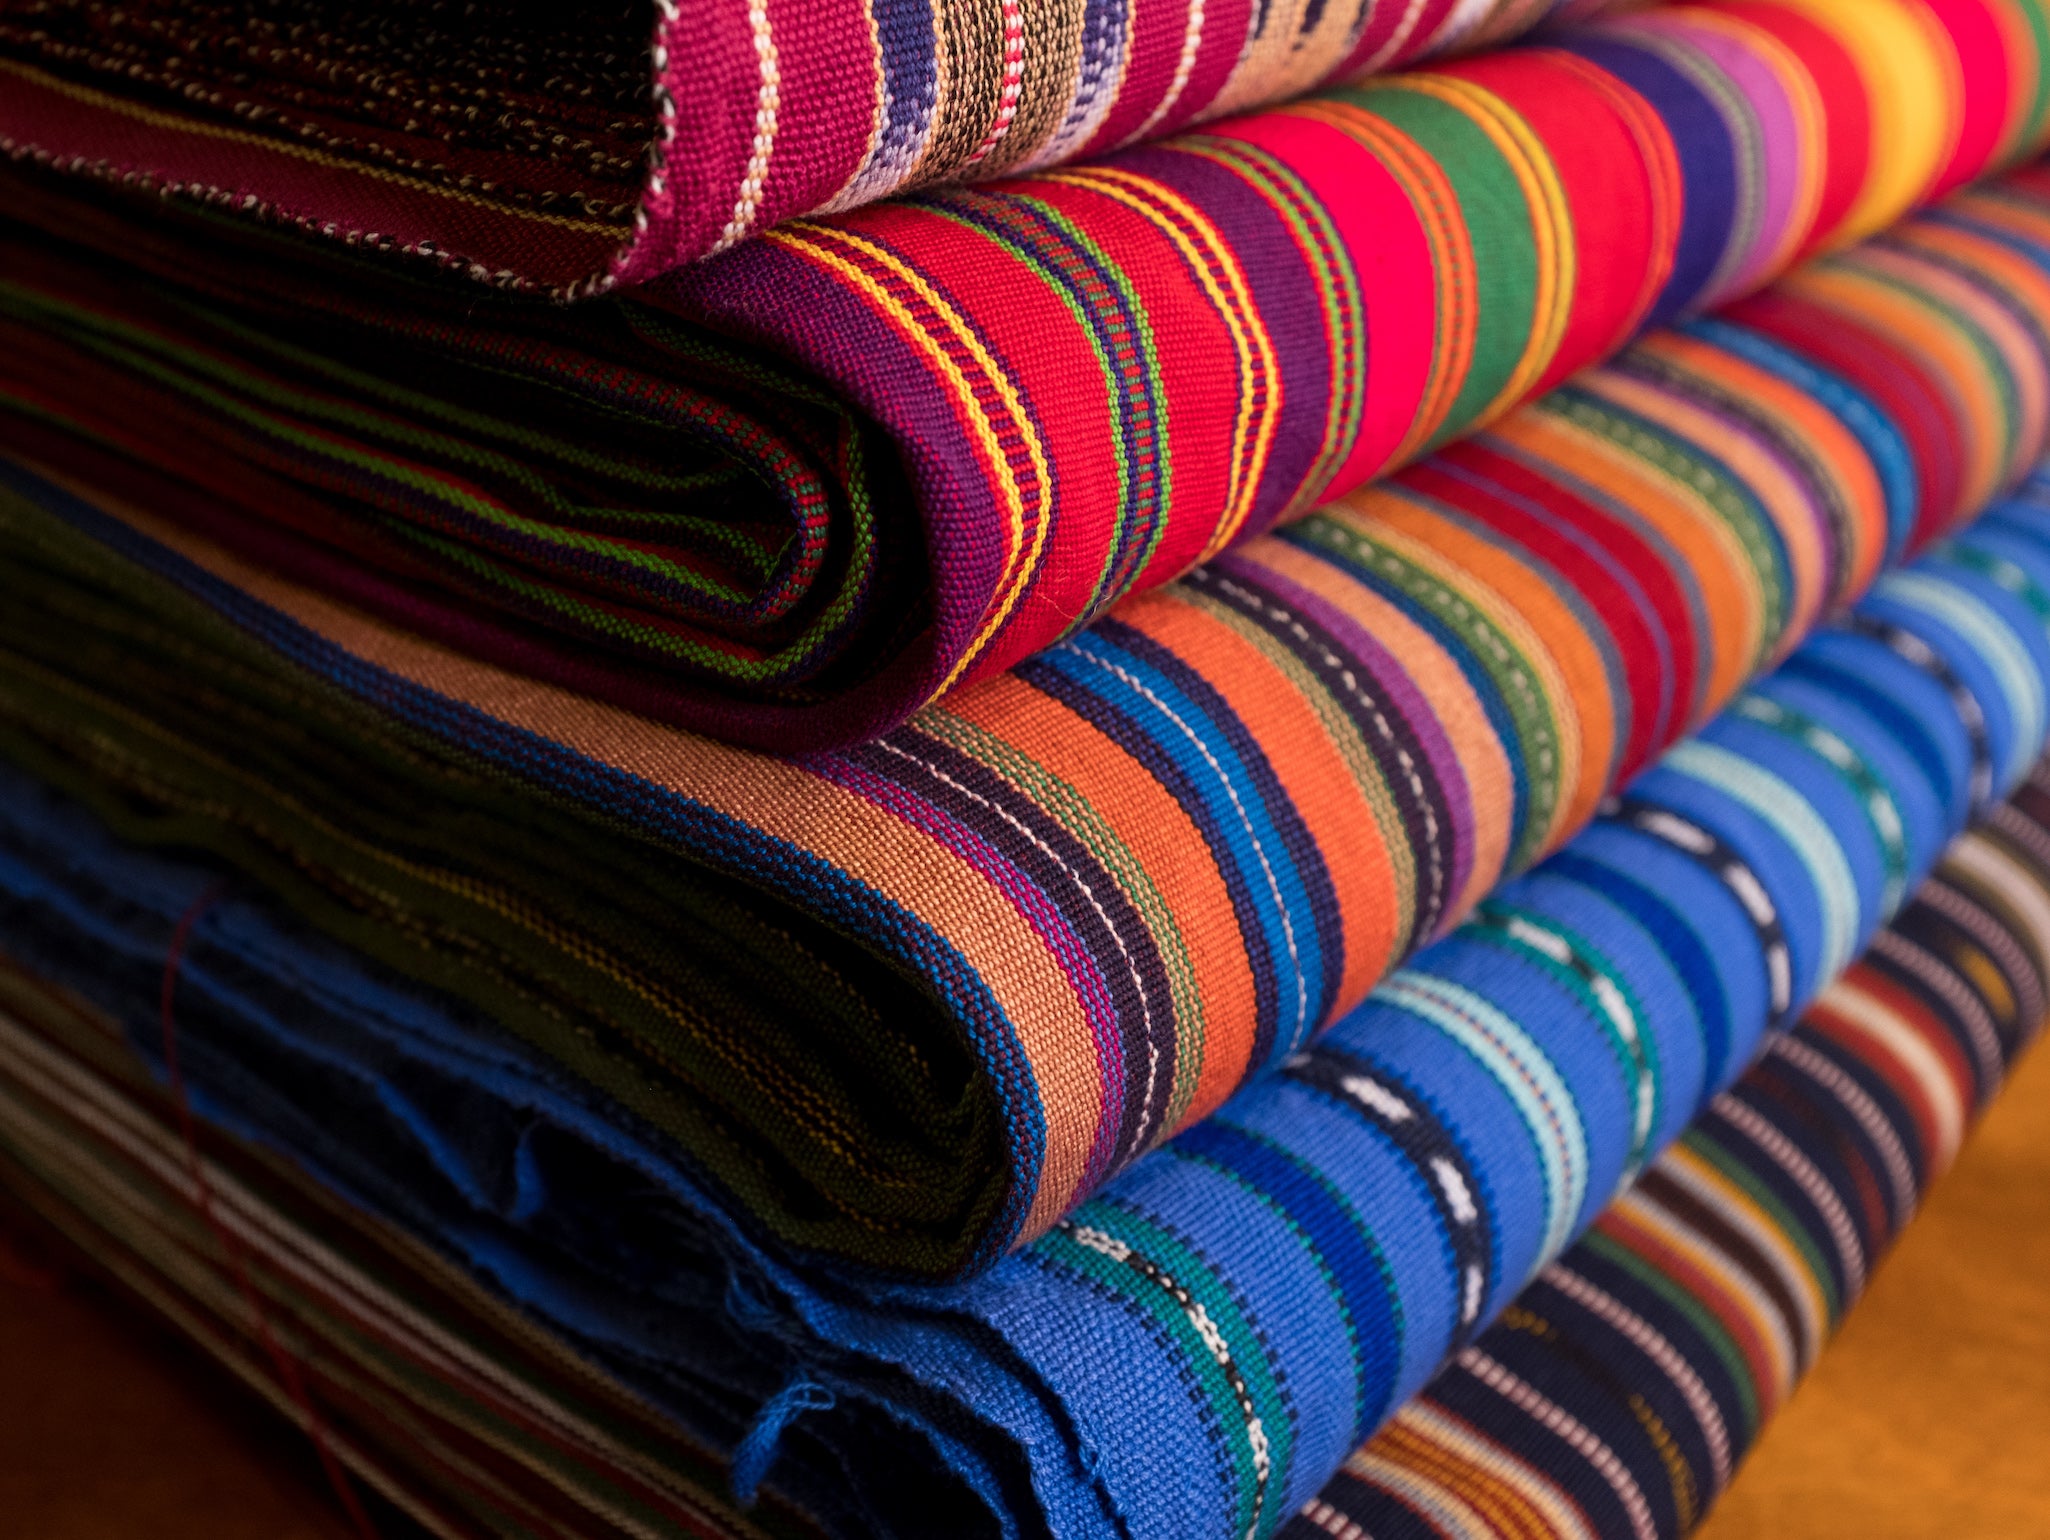 Handwoven textiles from Guatemala